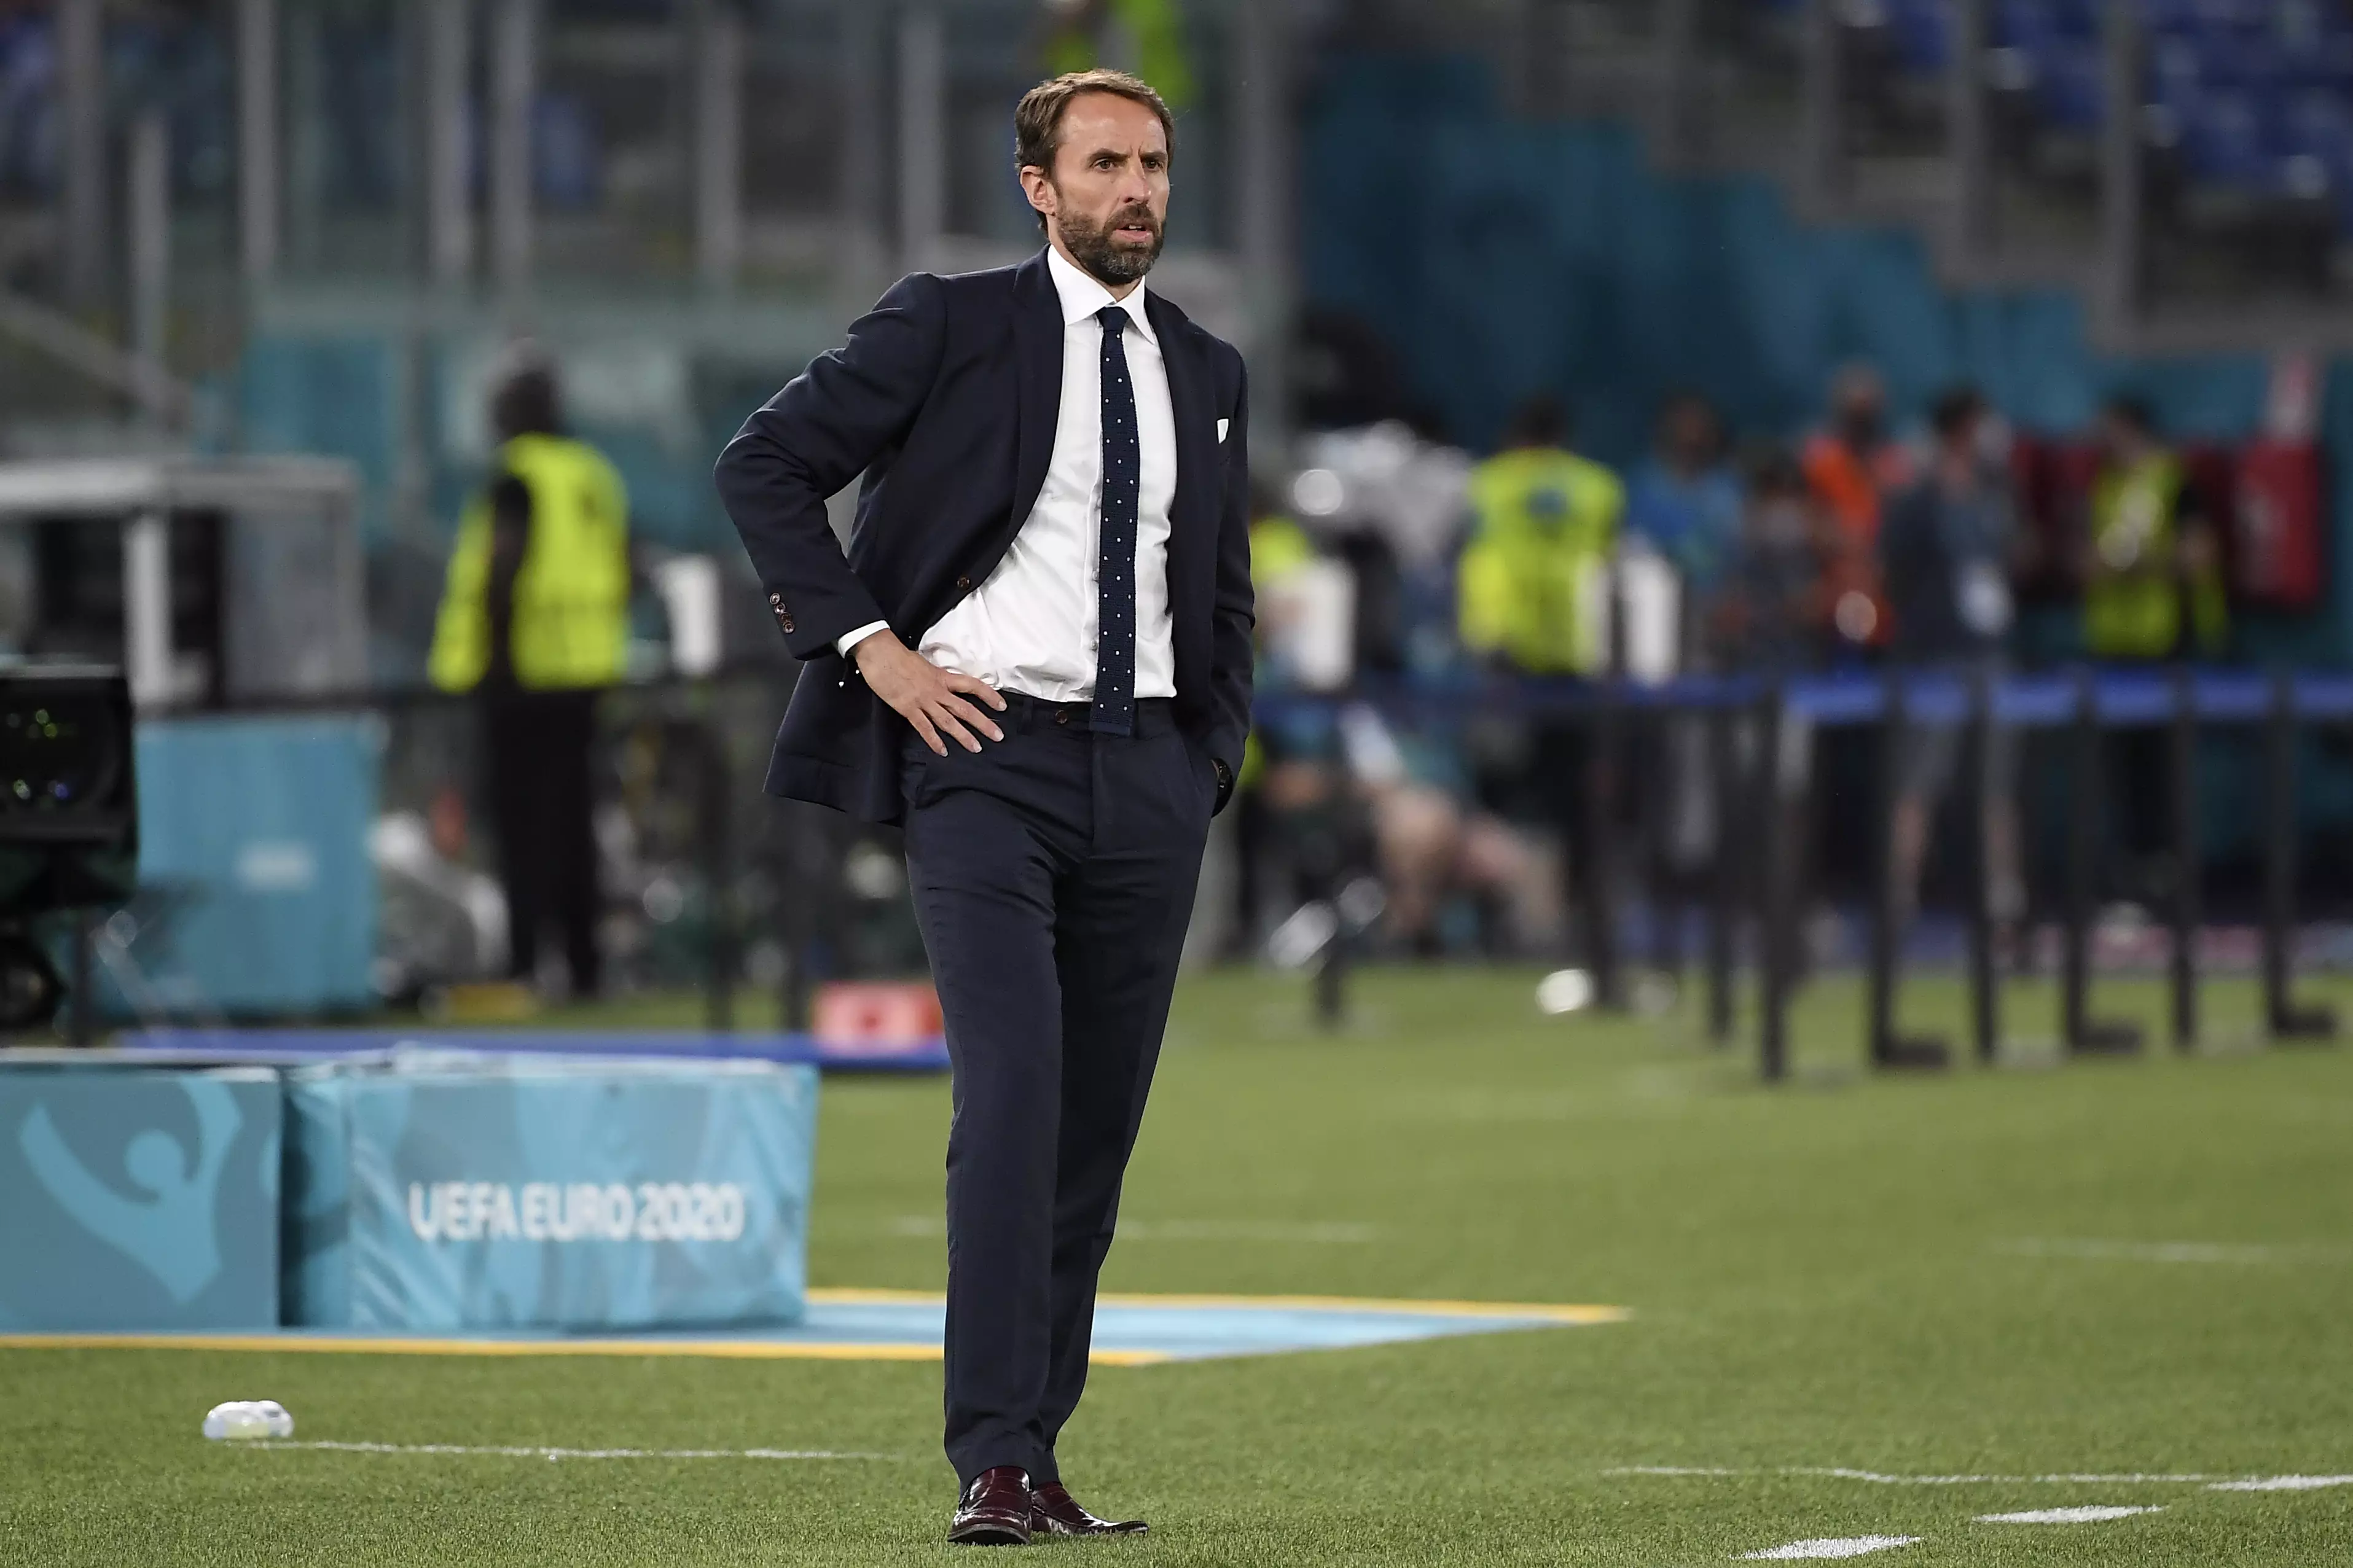 Gareth Southgate on the sideline in Rome.